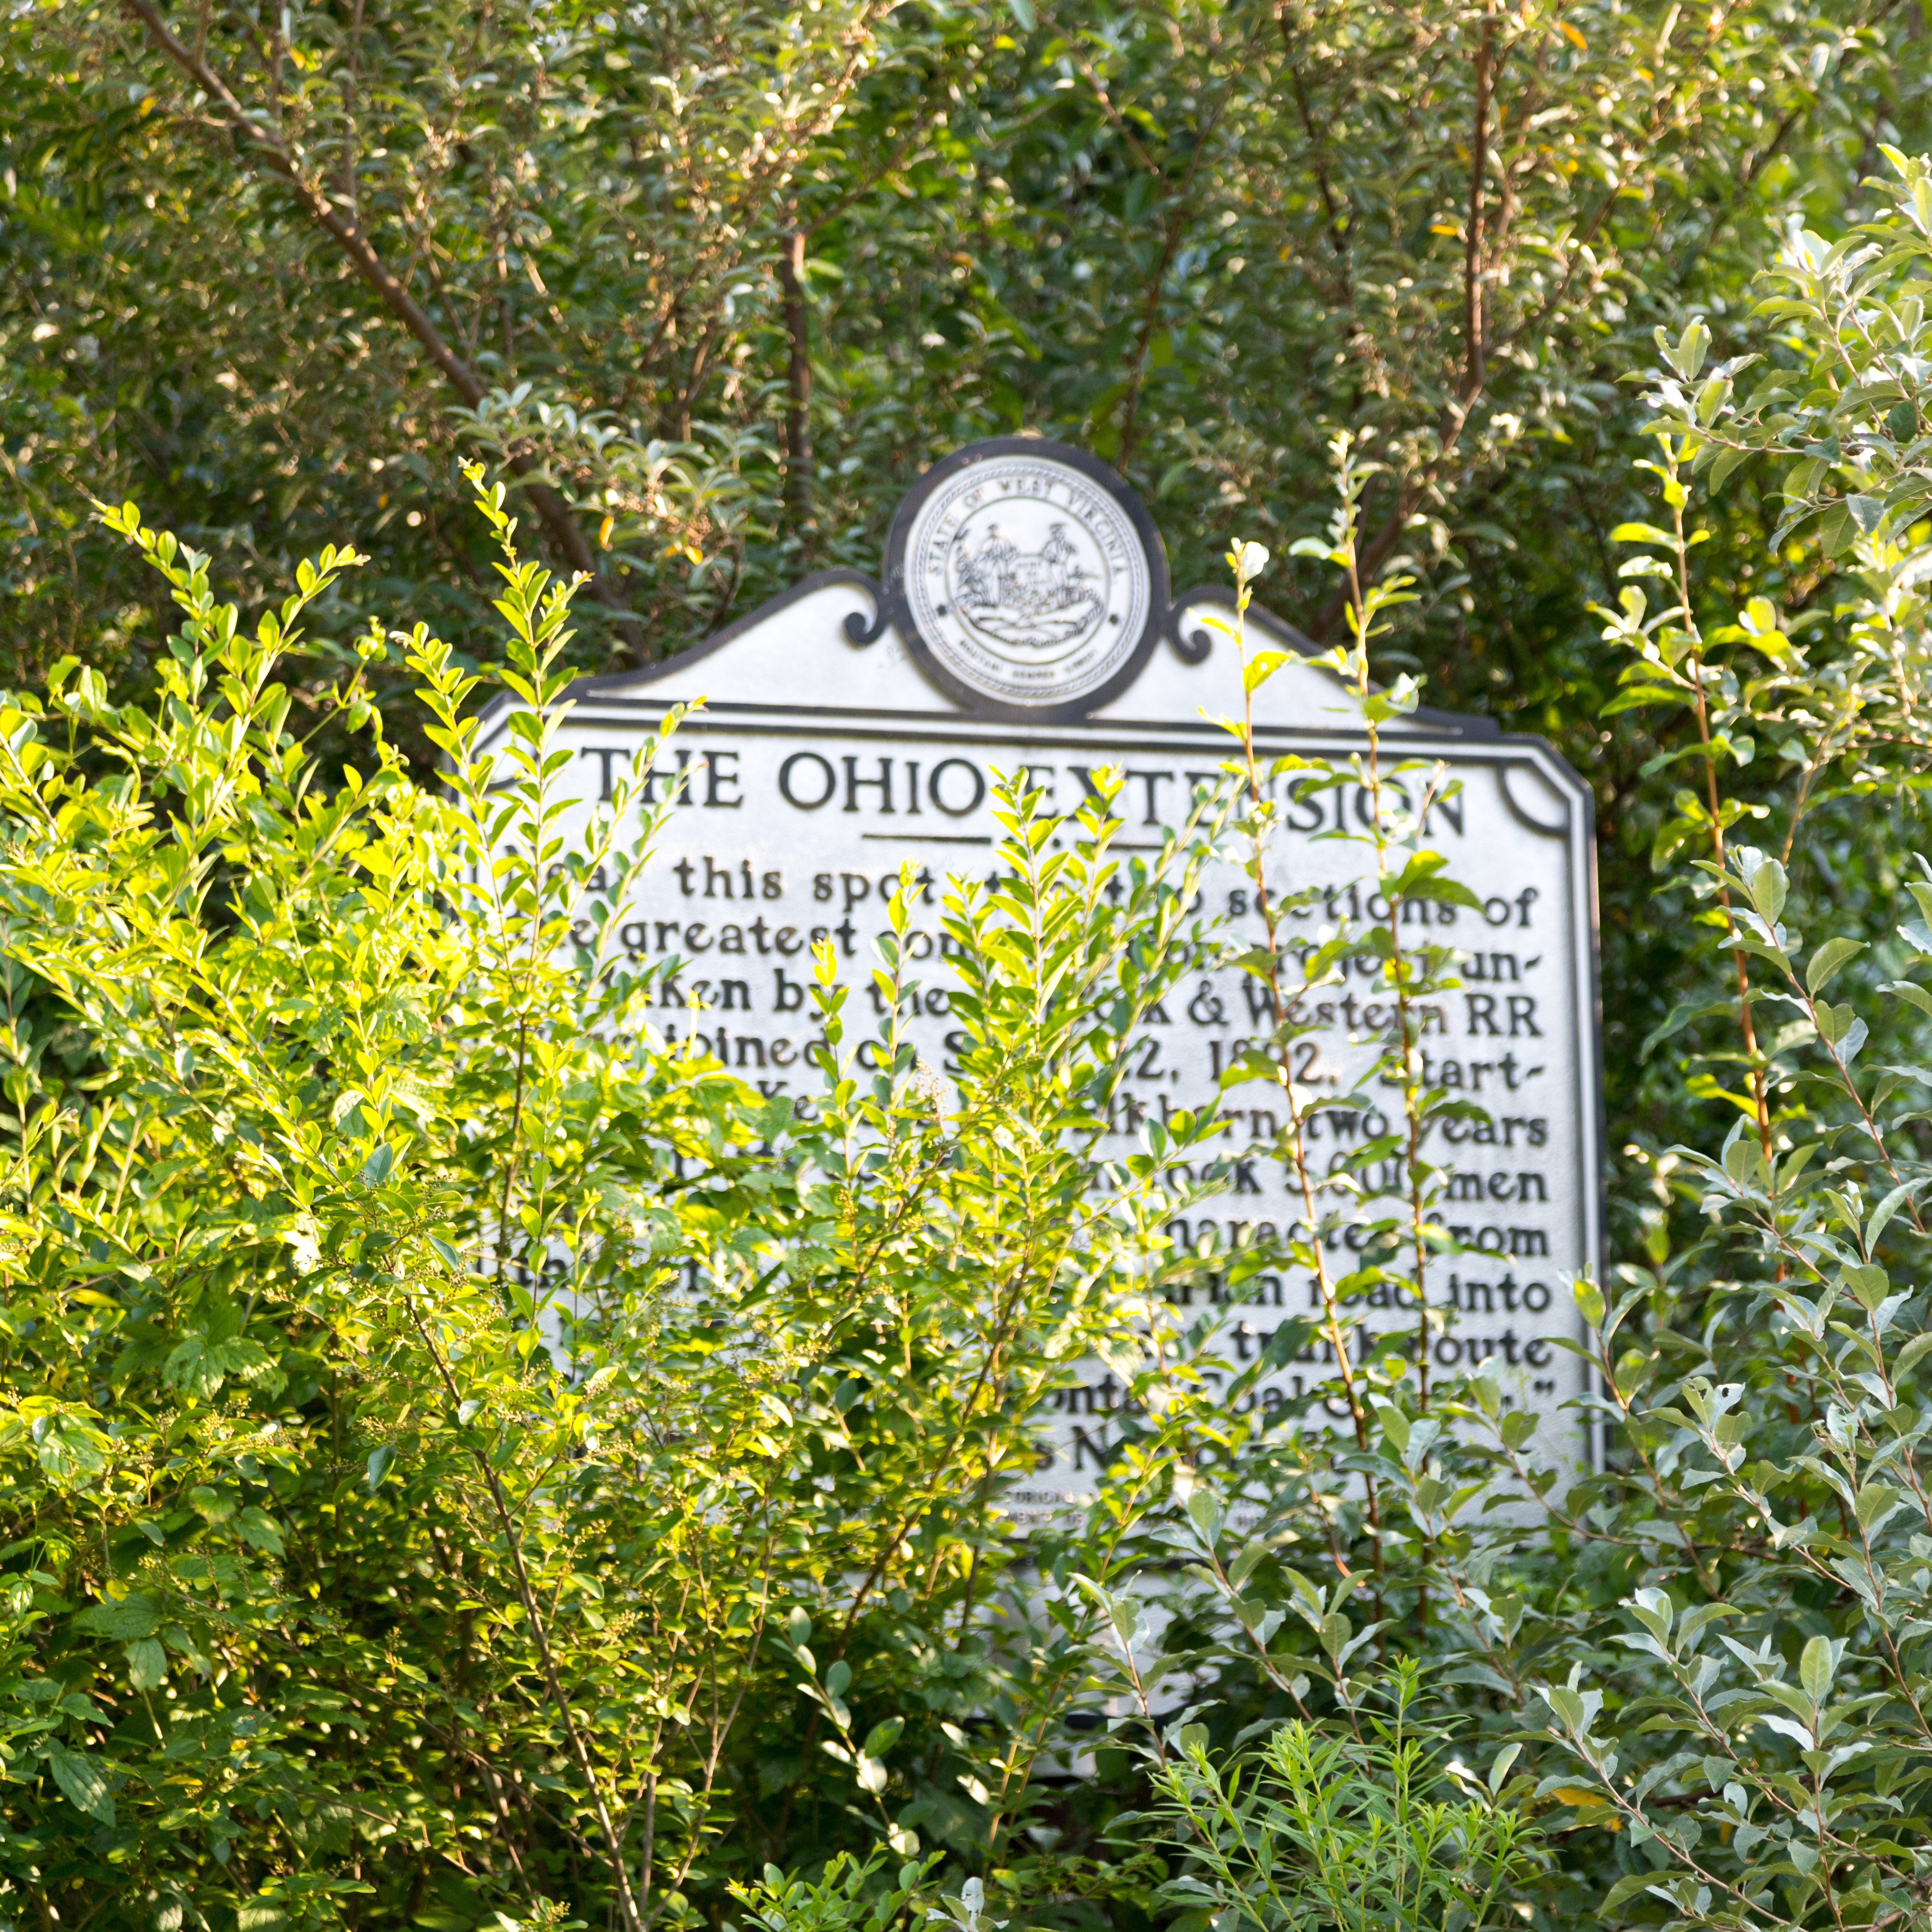 The Ohio Extension Marker